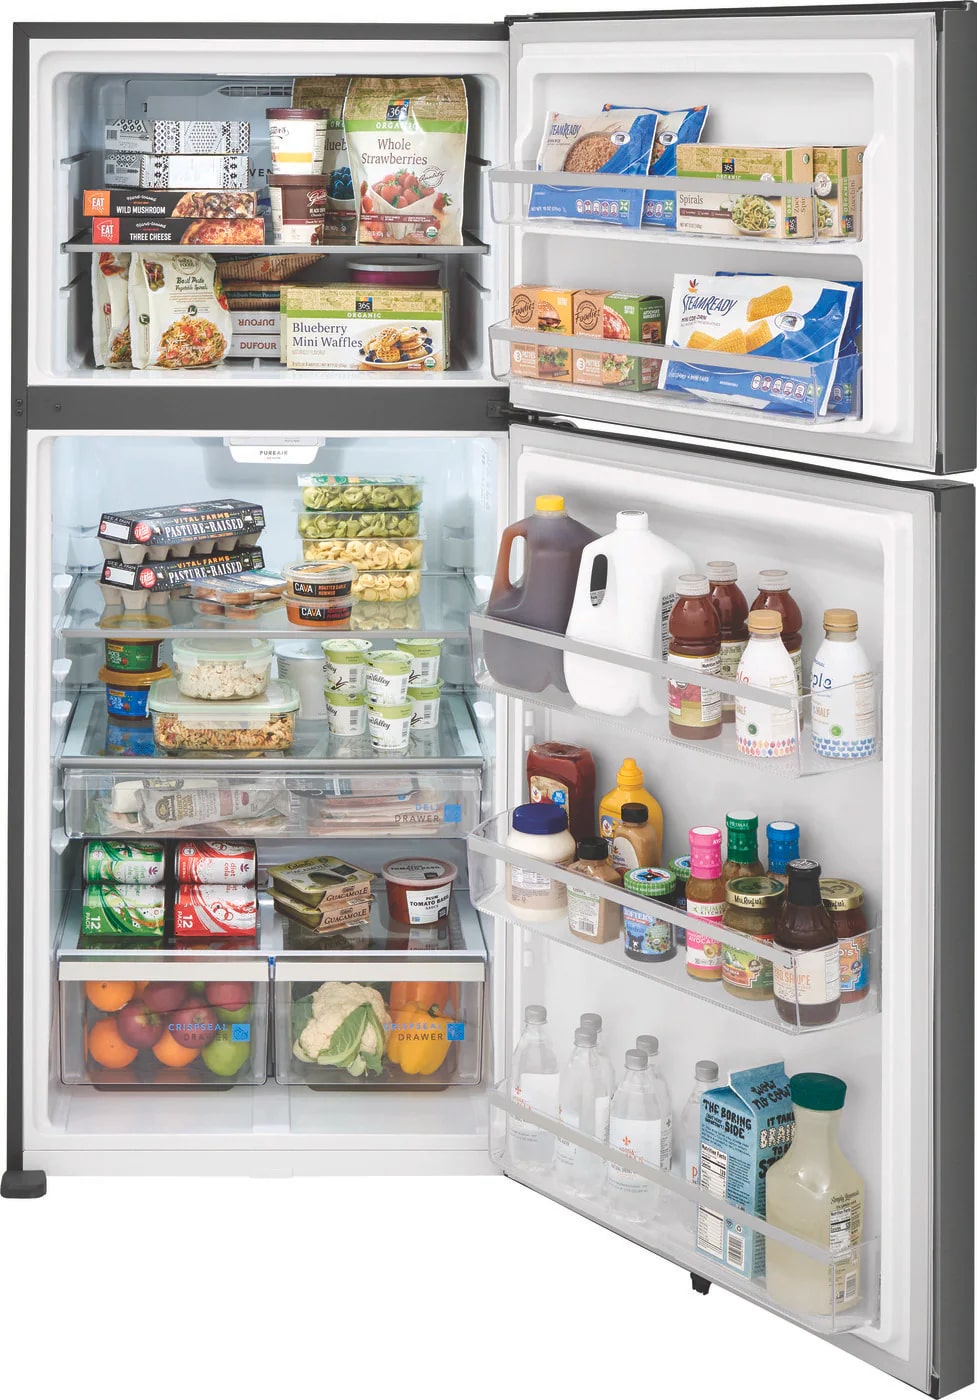 Frigidaire Gallery - 30 Inch 20 cu. ft Top Mount Refrigerator in Black Stainless - FGHT2055VD